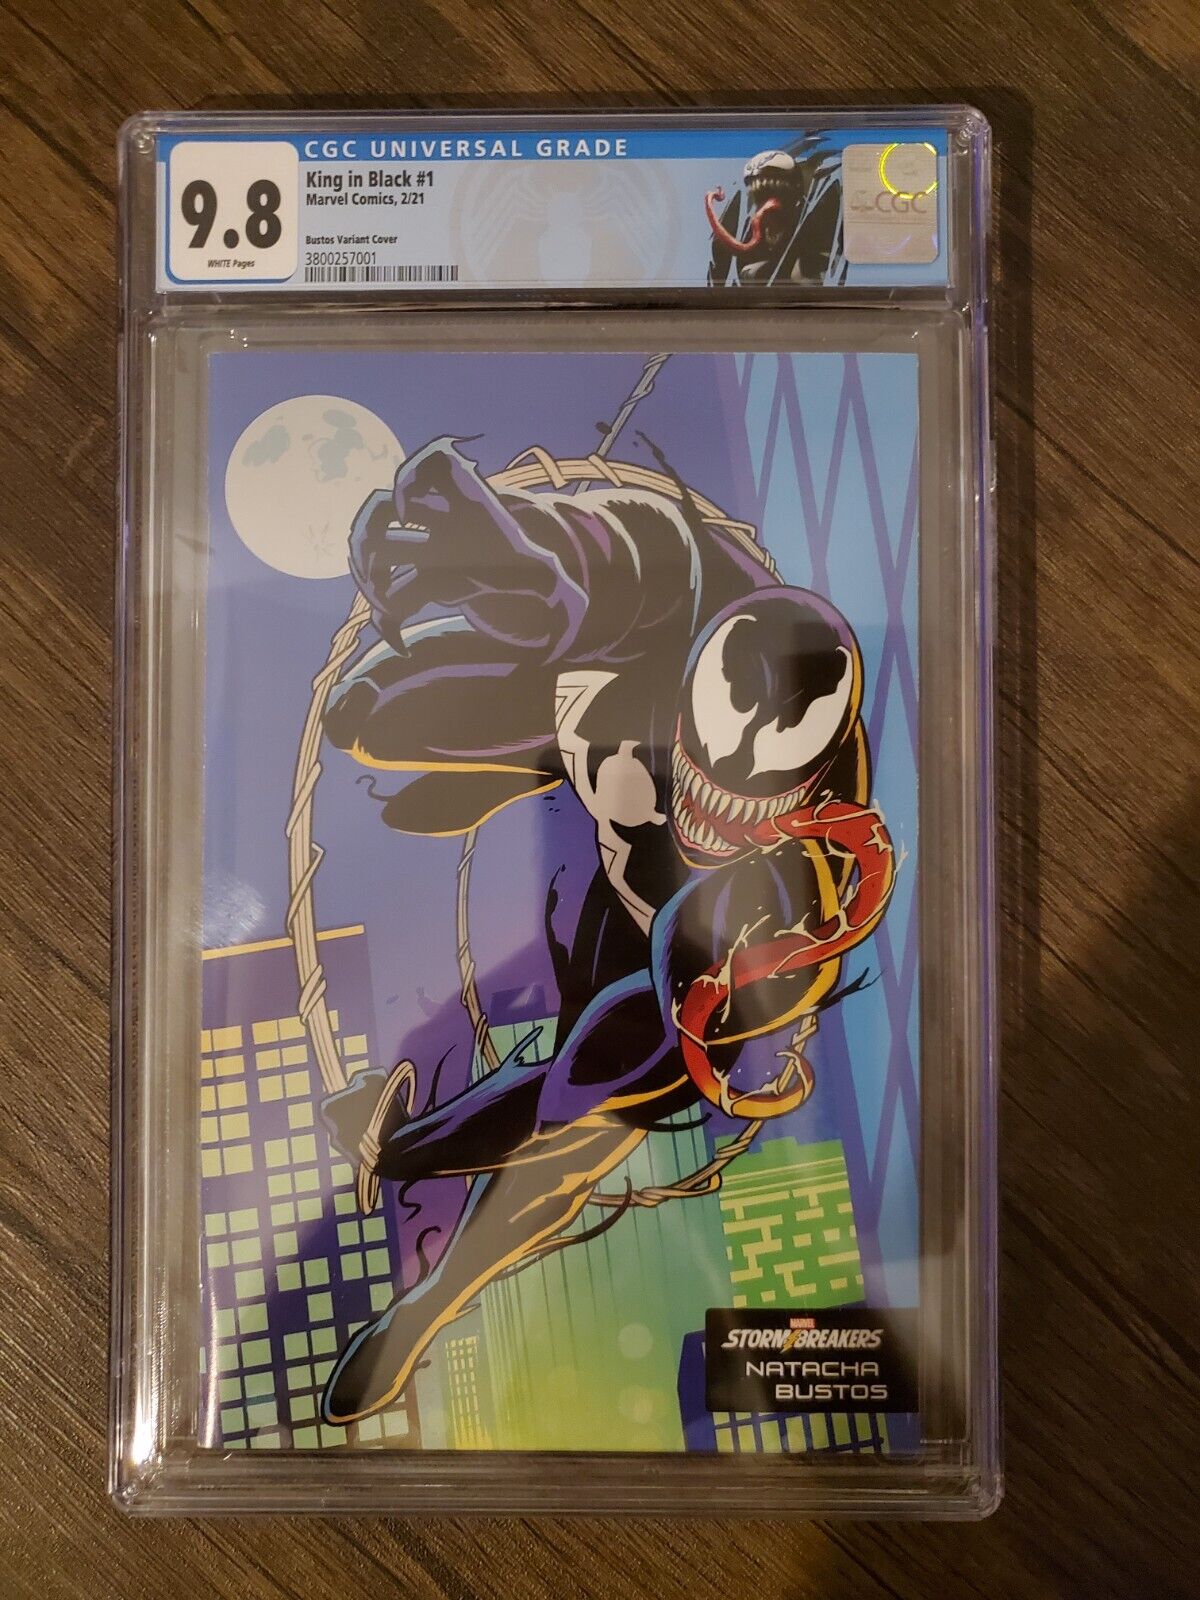 King In Black #1 Bustos Stormbreakers Variant Cover CGC 9.8